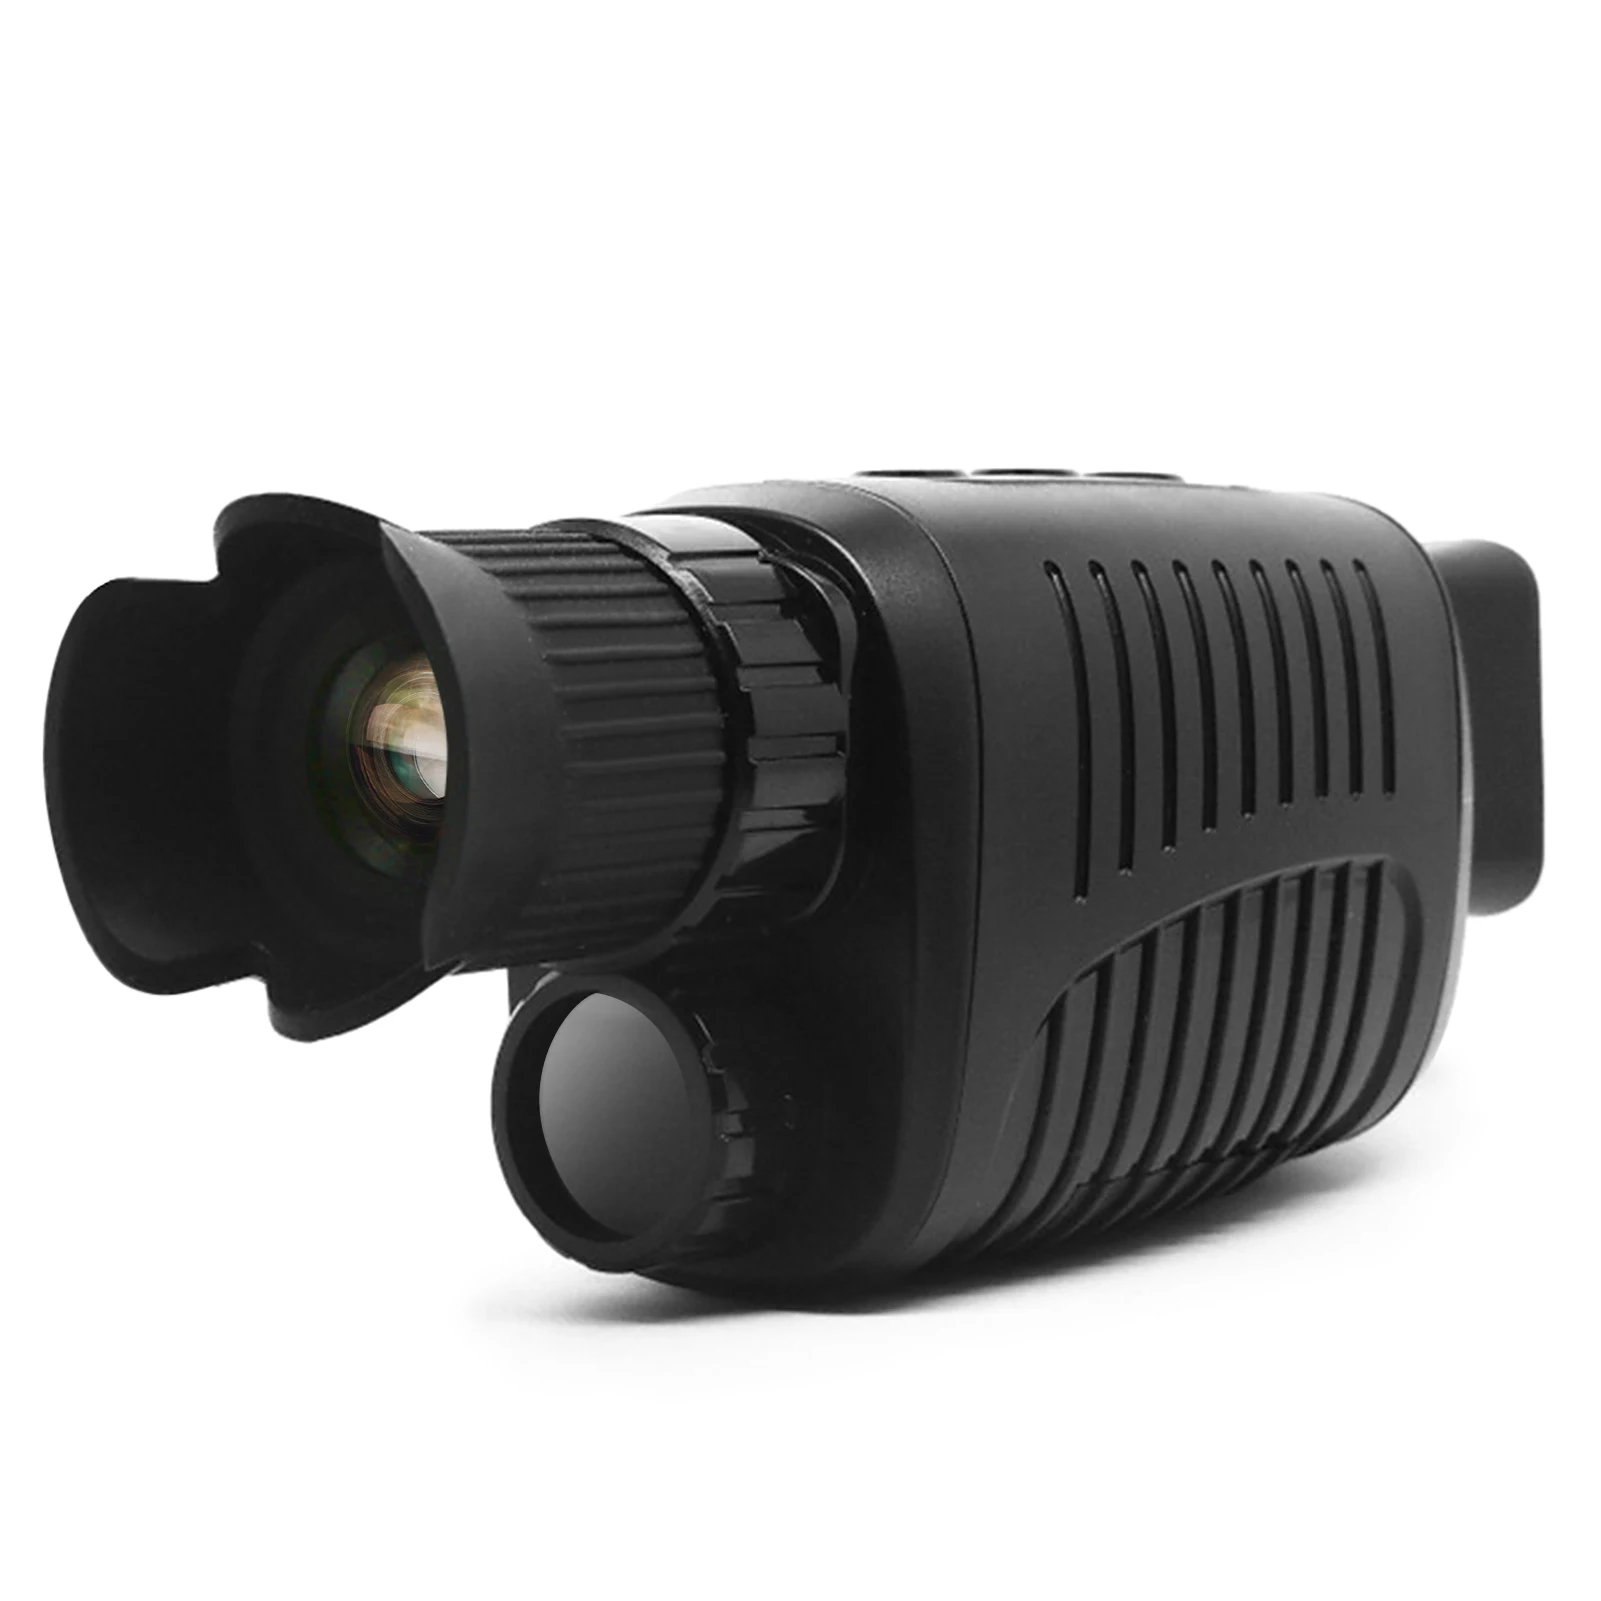 1080P Digital High Definition Infrared Night Vision Monocular 5X Digital Zoom Full Colored Night Vision with 1.5'' Screen